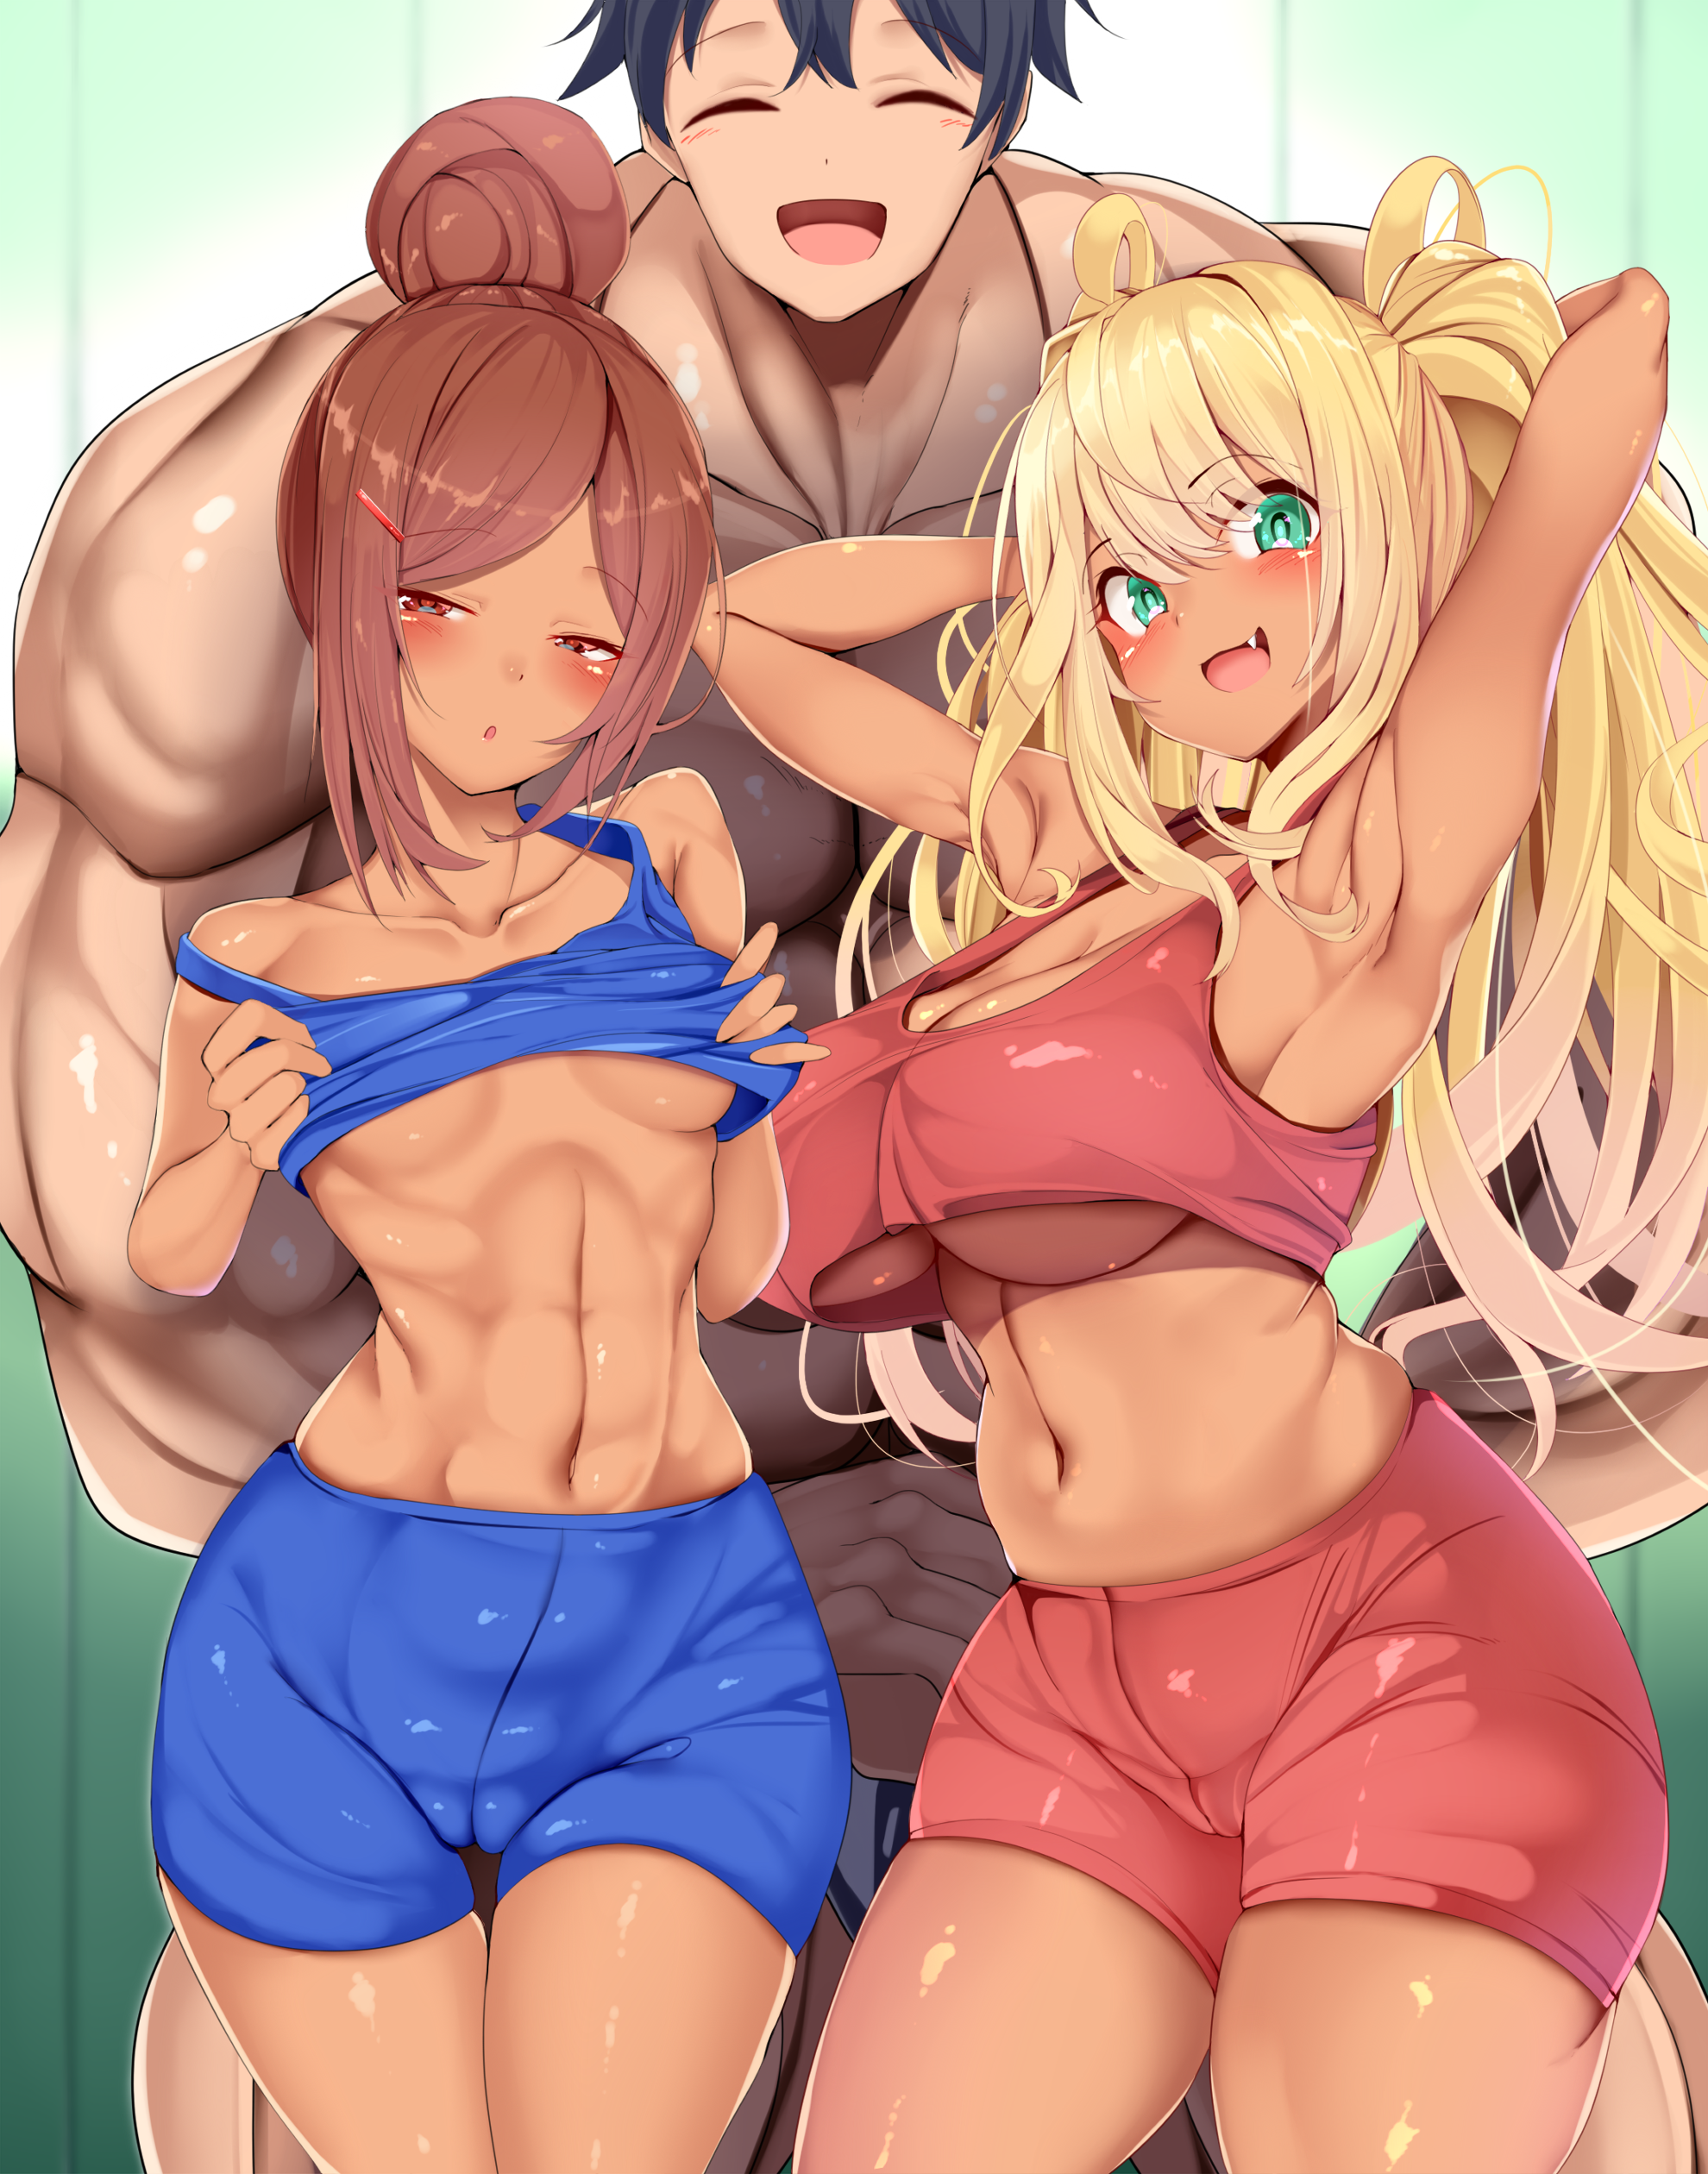 Anime 1980x2520 Dumbbell Nan Kilo Moteru? big boobs small boobs JK thick ass wide hips wide breasts cleavage no bra lifting shirt thighs the gap thick thigh ecchi sports bra muscles 6-pack biceps abs underboob belly button 2D Hibiki Sakura Uehara Ayaka Naruzo Machio bare shoulders messy hair long hair short hair black hair brunette anime portrait display open mouth looking at viewer curvy red eyes anime girls anime boys blonde